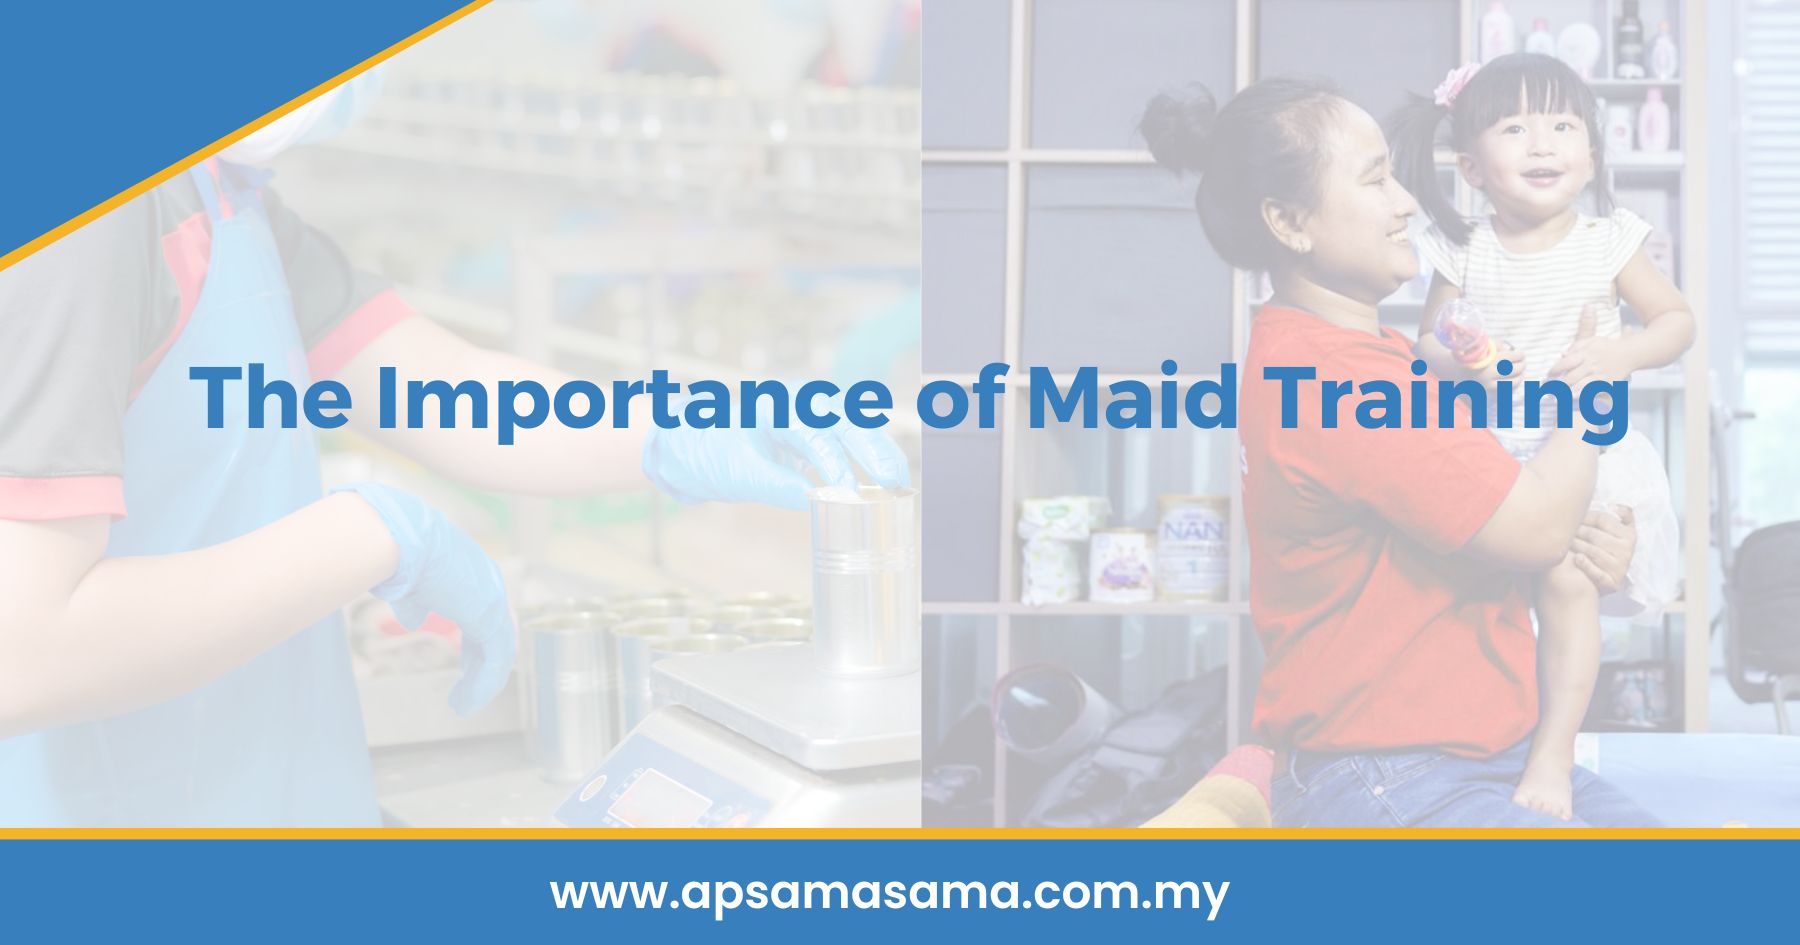 The Importance of Maid Training